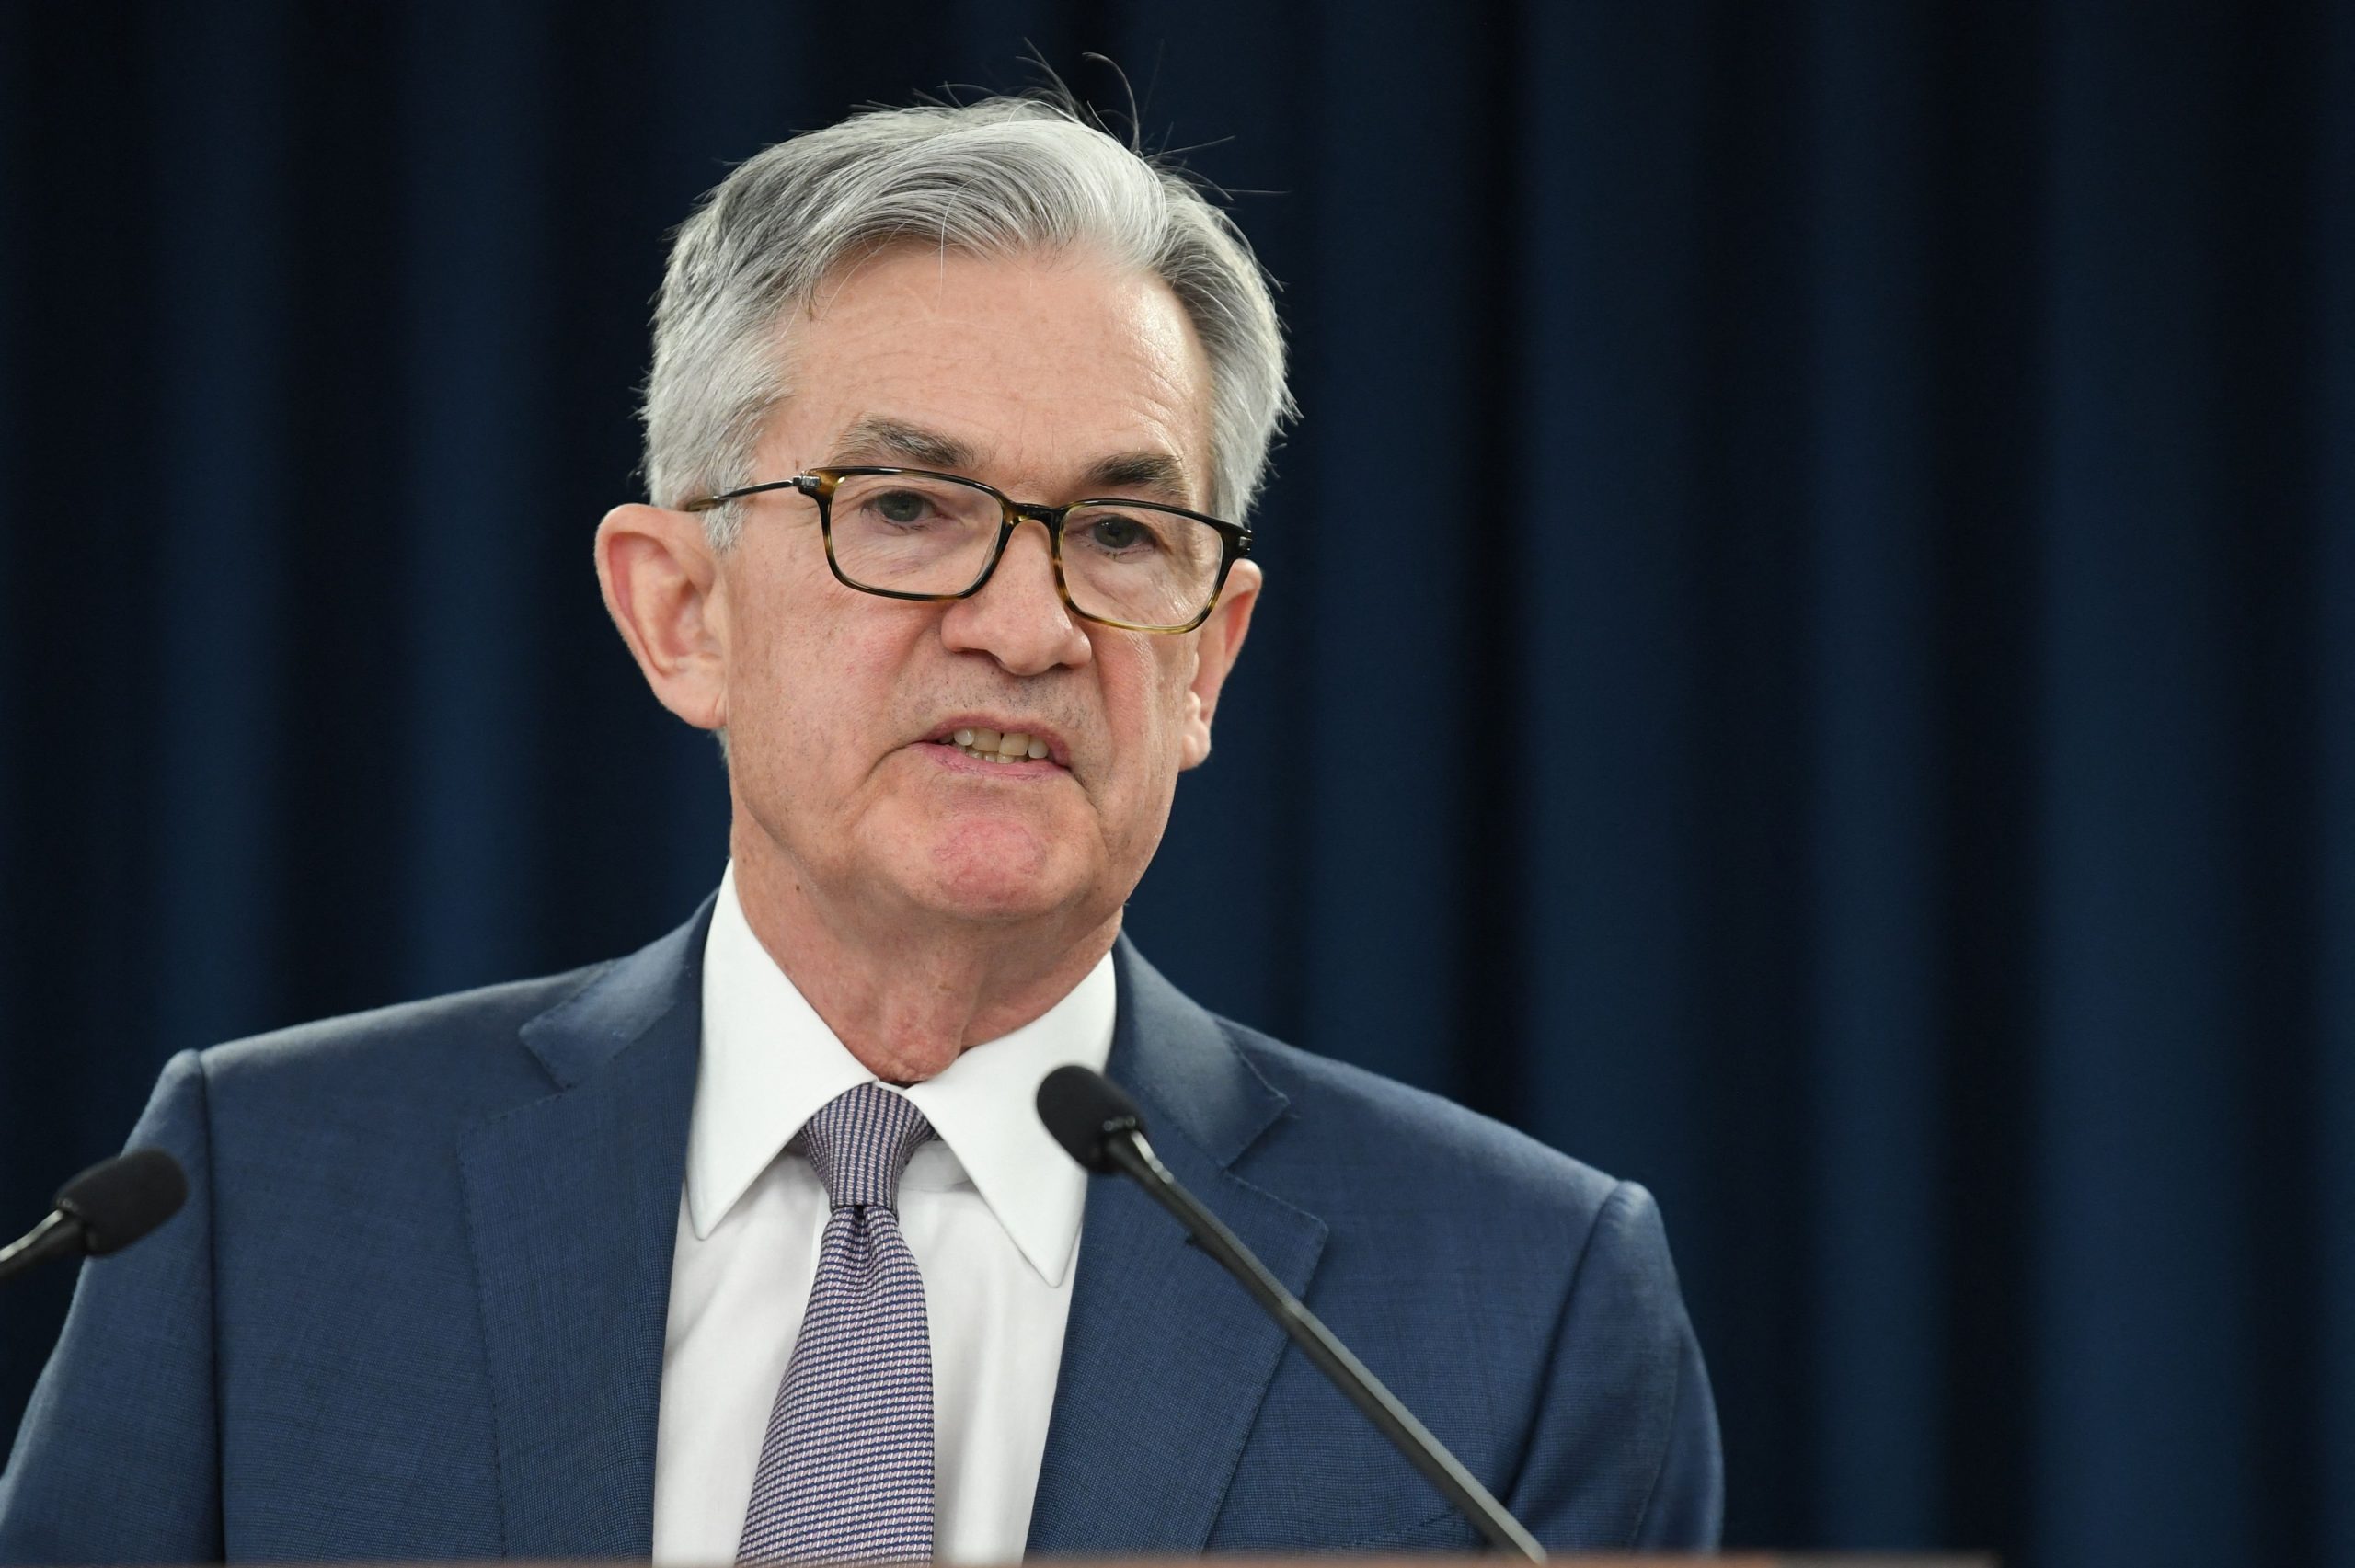 Federal Reserve Chair Jerome Powell says US COVID recovery ‘strengthening’